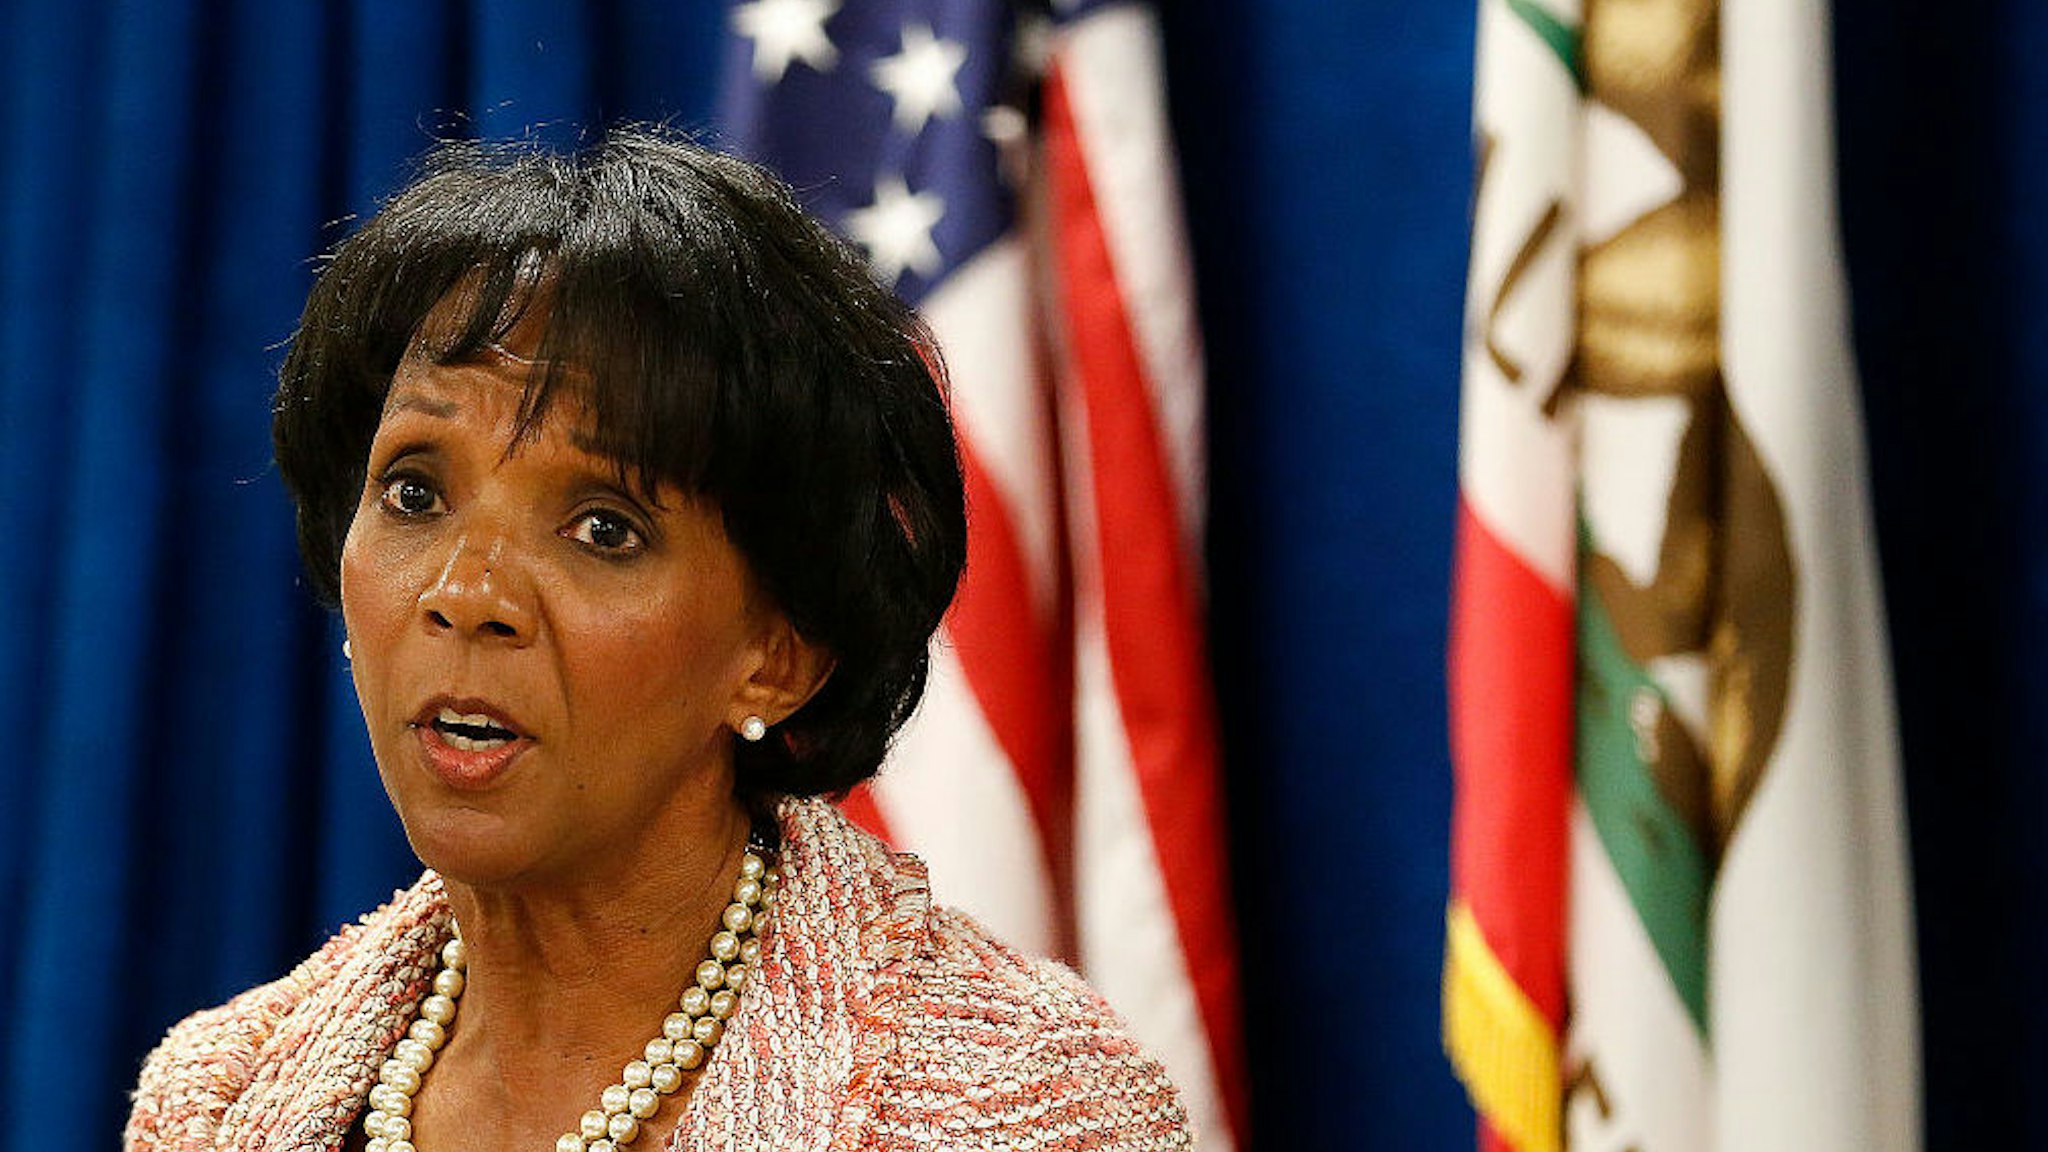 LOS ANGELES, CA-JUNE 29, 2015: Los Angeles County District Attorney Jackie Lacey announces the creation of the Conviction Review Unit, a new unit to review wrongful conviction claims made by defendants, during a press conference at the Hall of Justice in Downtown Los Angeles on June 29, 2015.